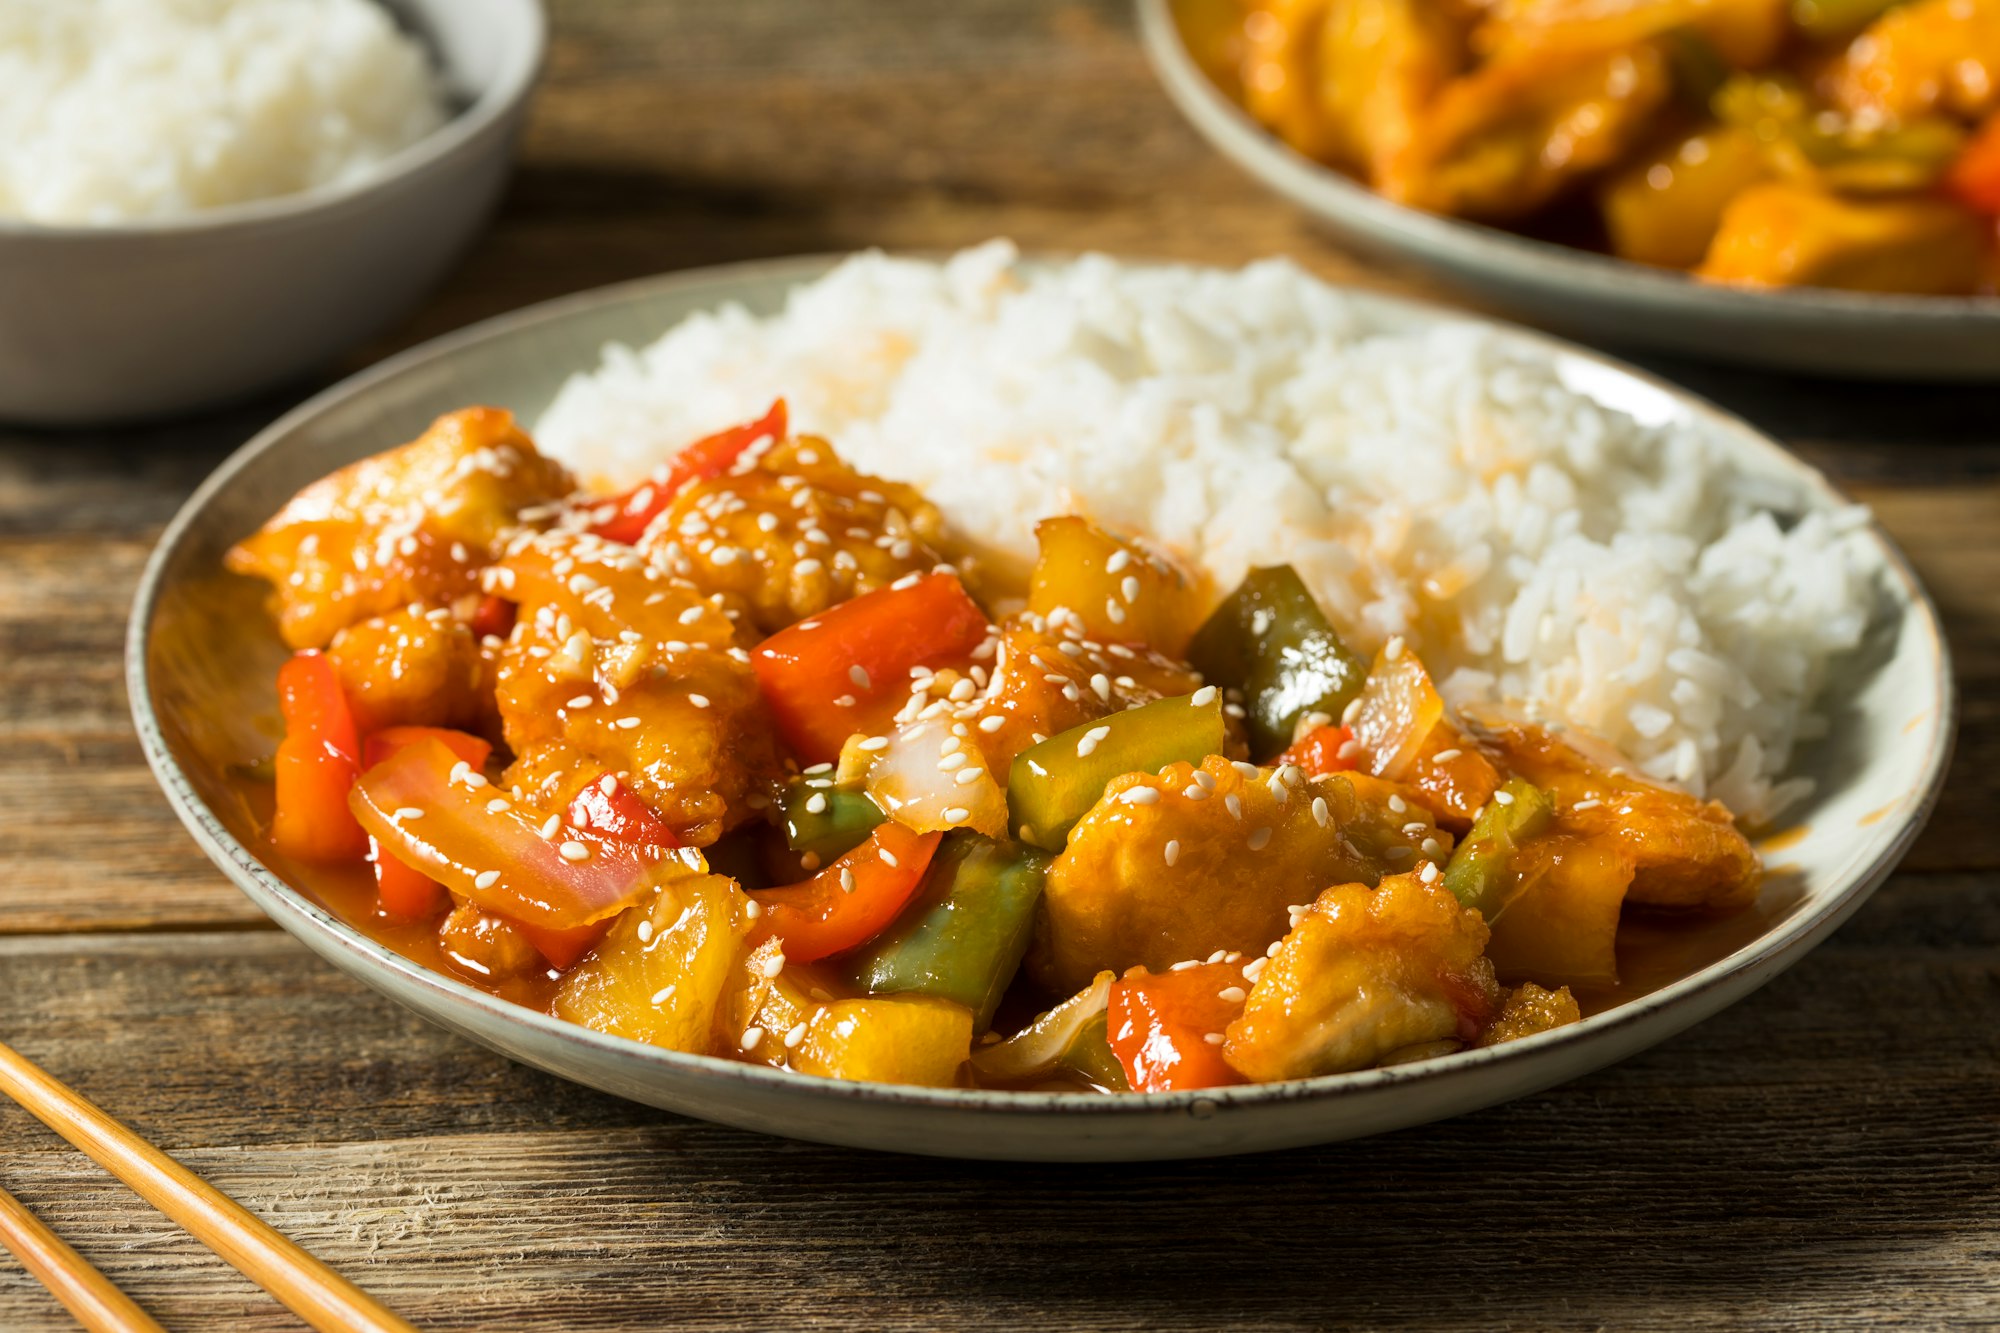 Homemade Chinese Sweet and Sour Chicken